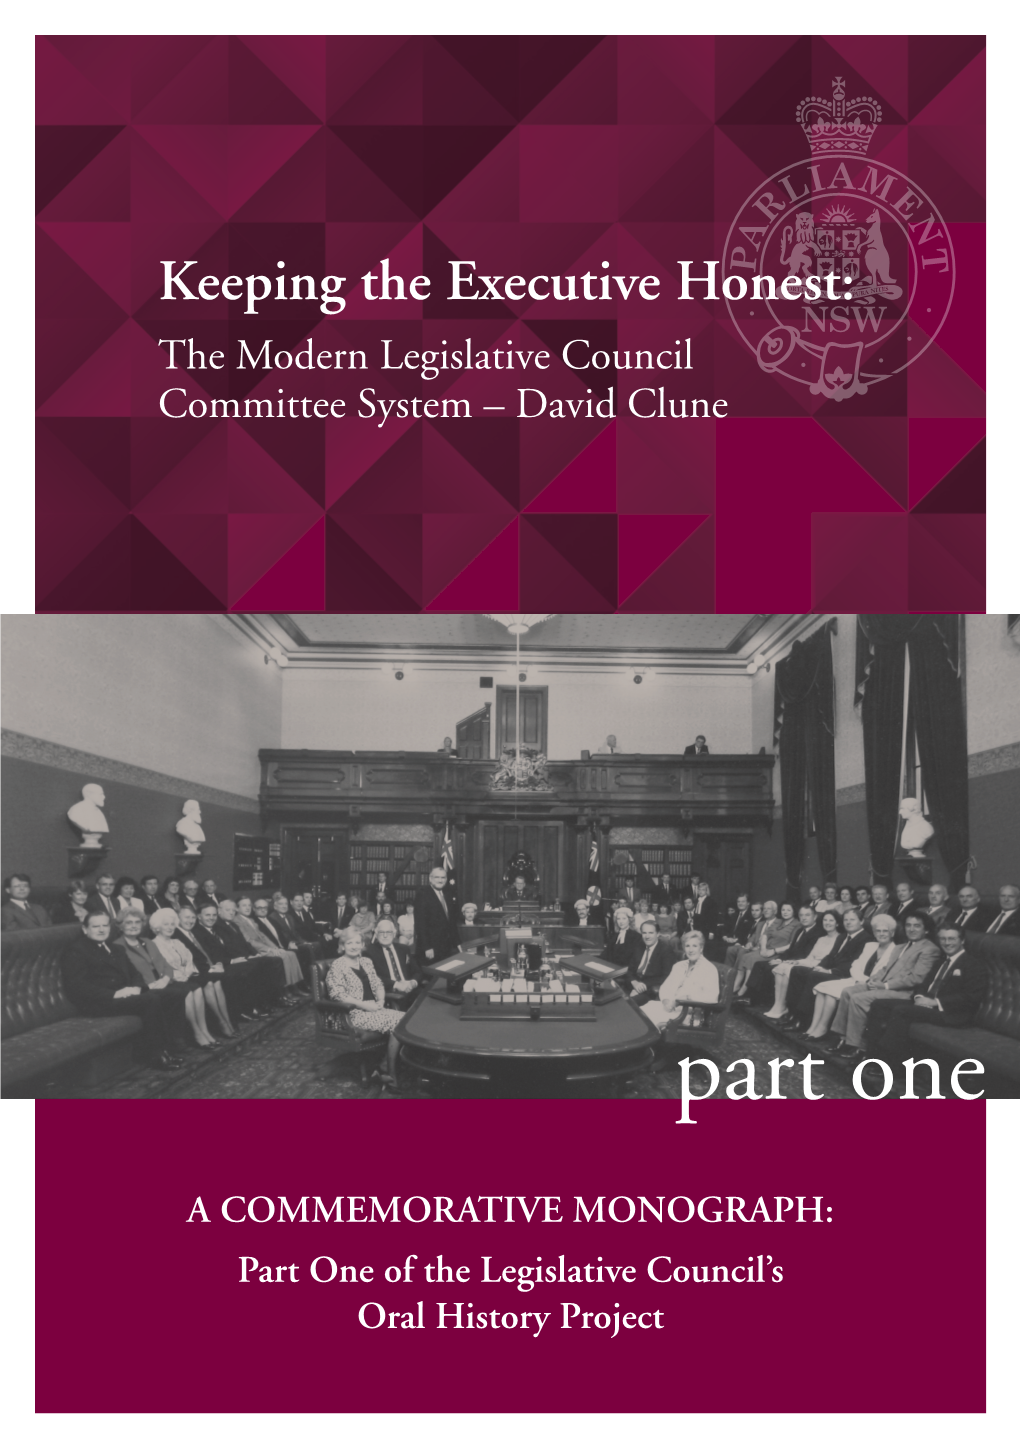 The Modern Legislative Council Committee System – David Clune